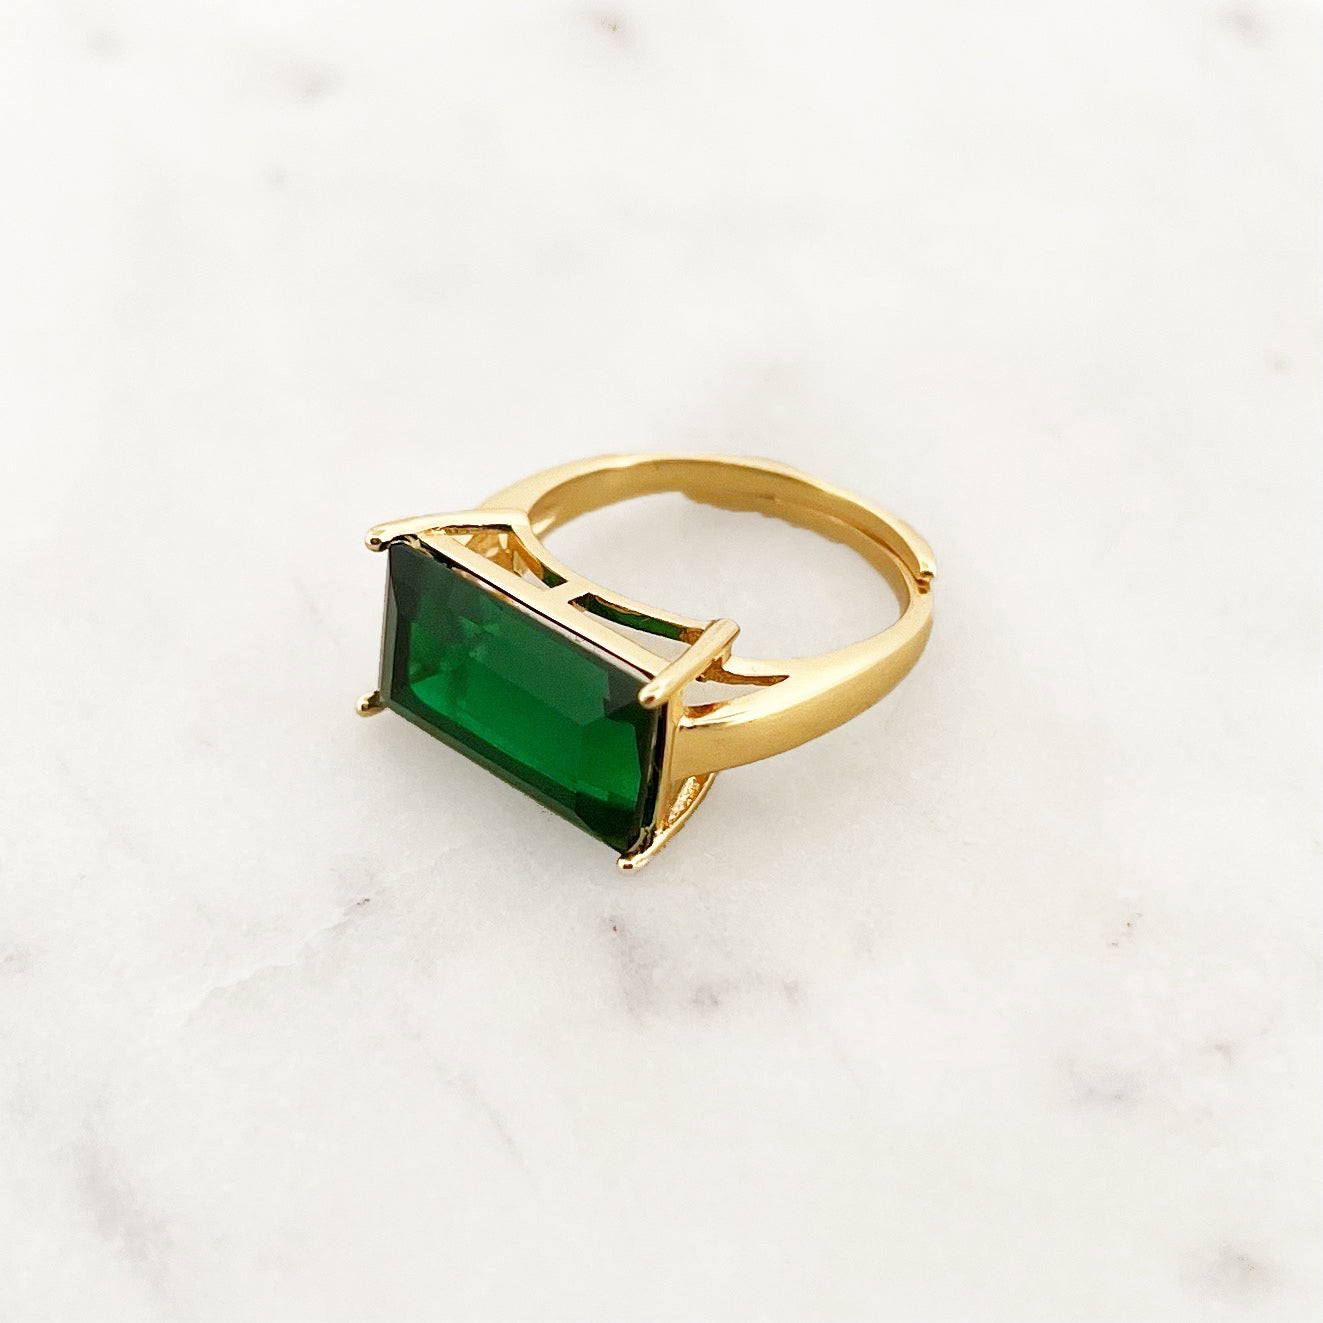 Ring With Dark Green Stone - $25 New With Tags - From Asiya